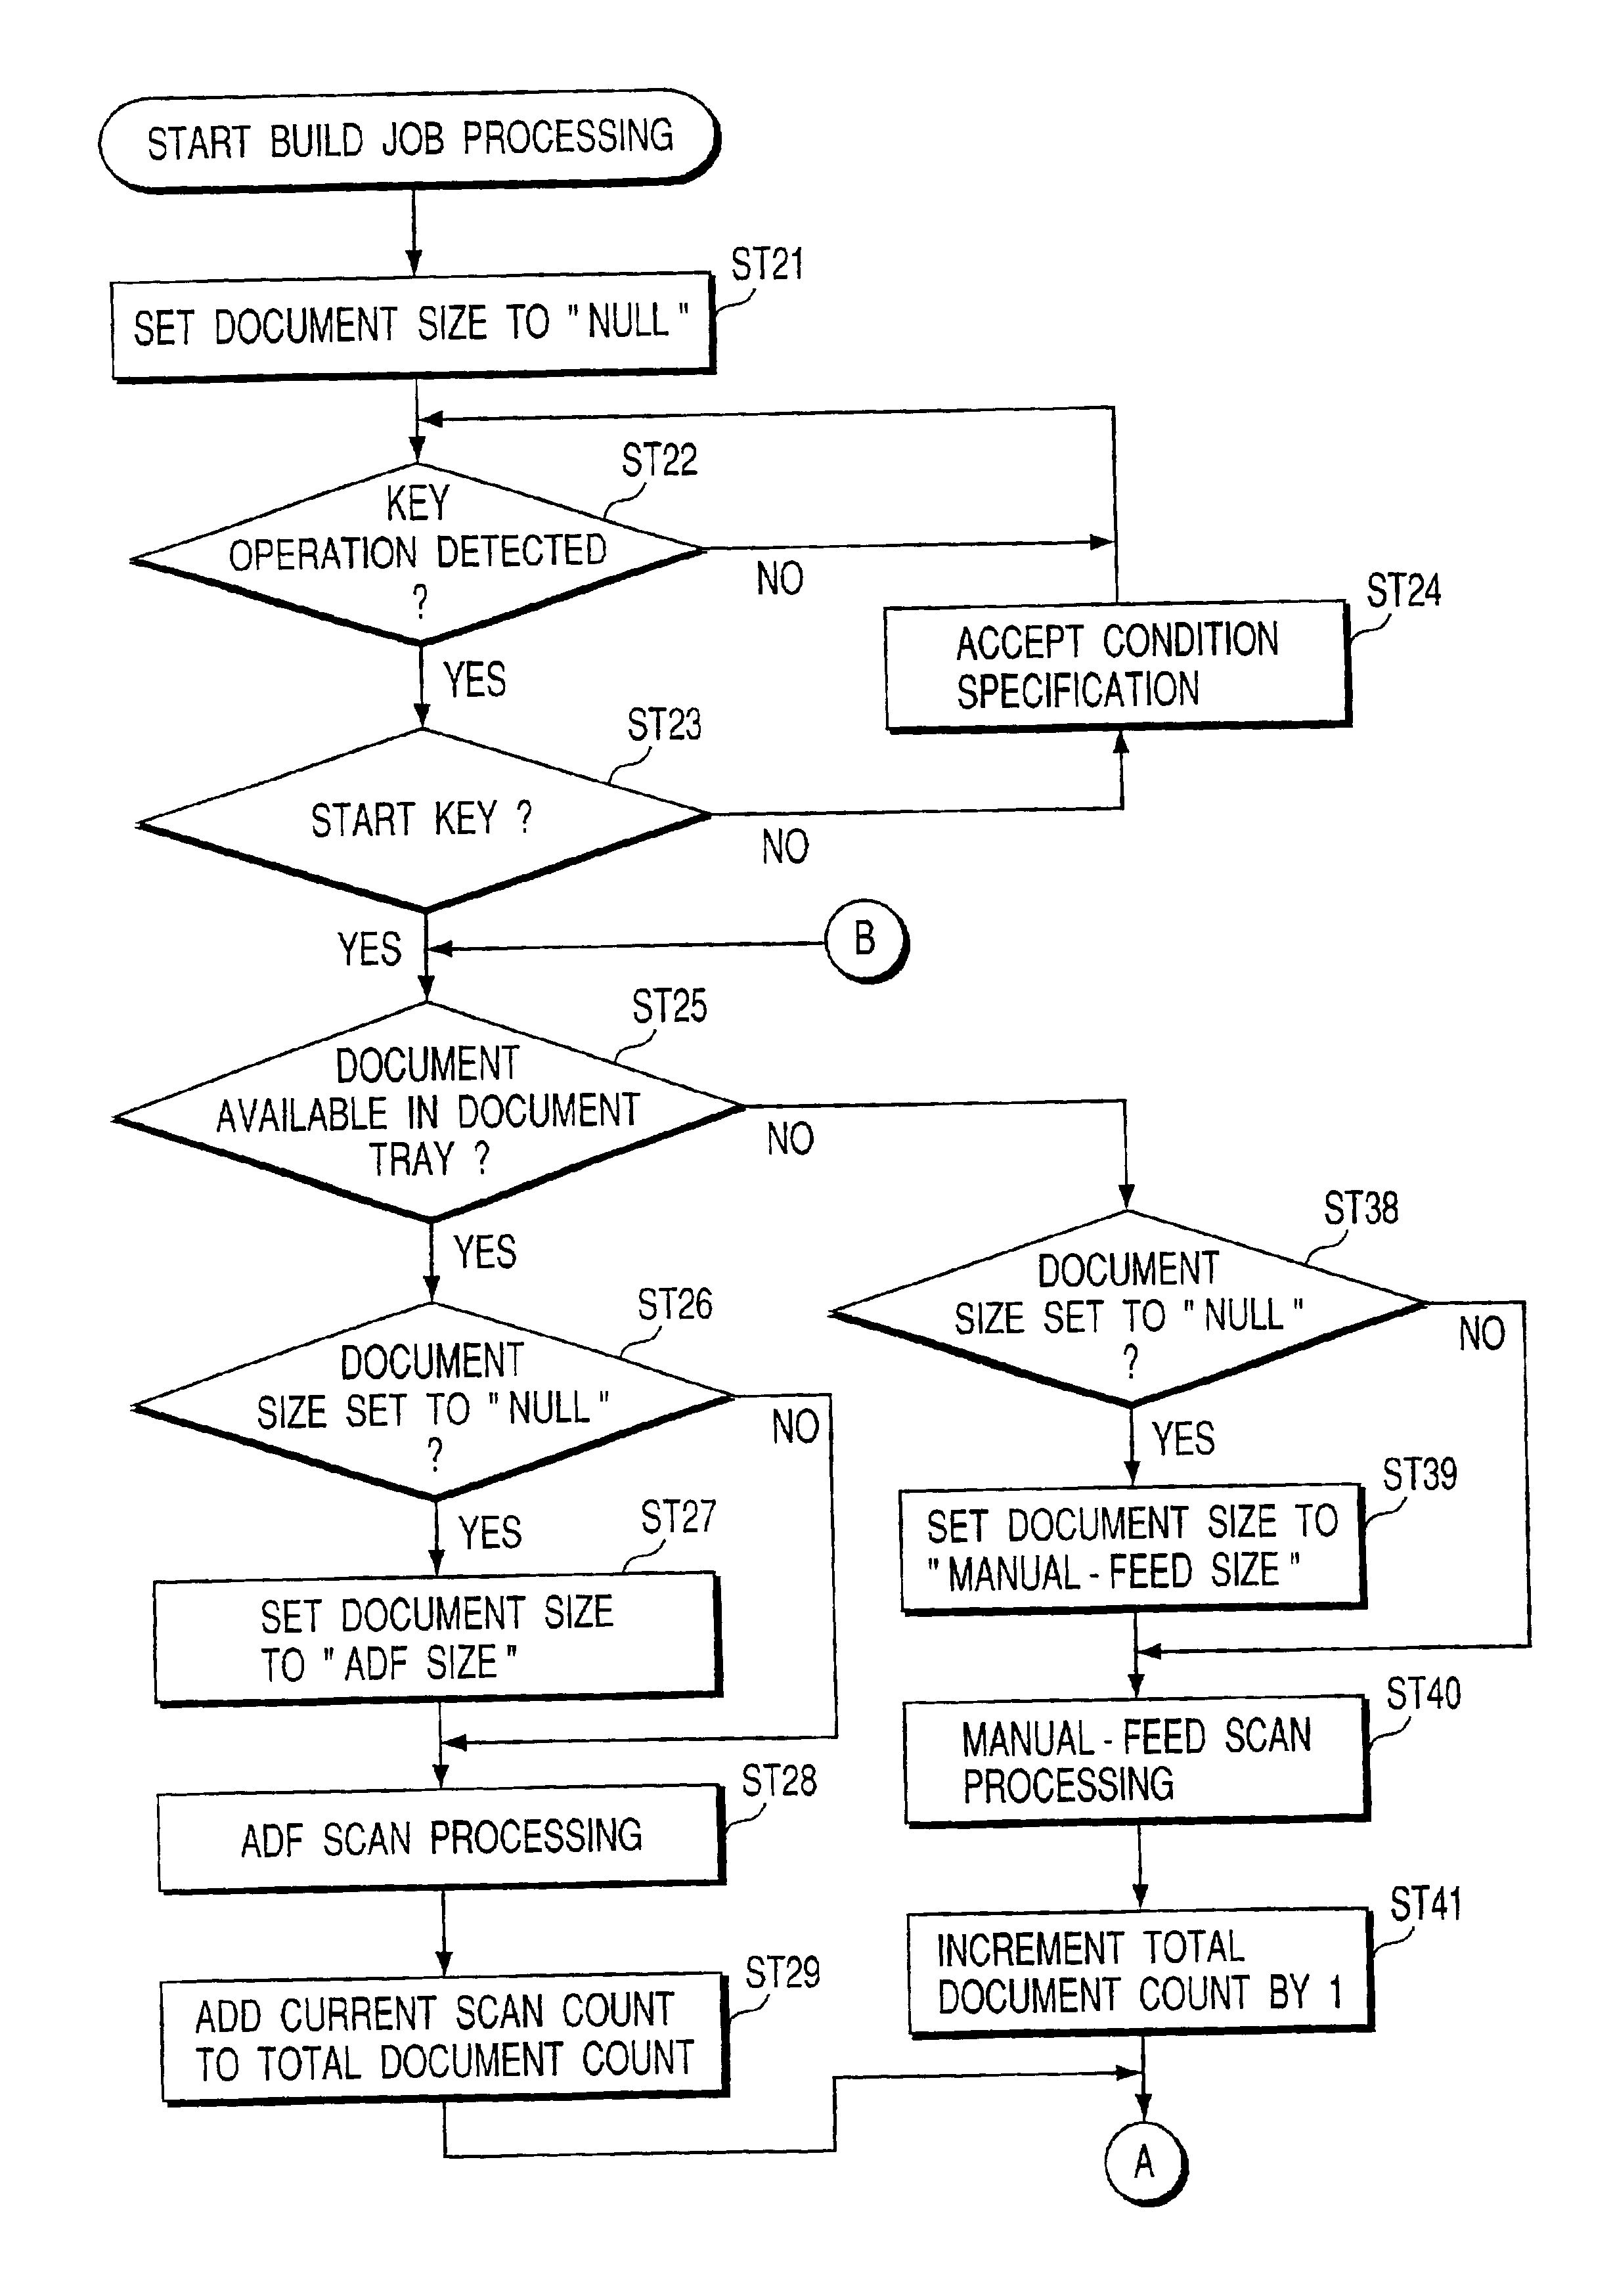 Document scanning apparatus and document scanning method for sequentially scanning documents and generating image data corresponding to these documents